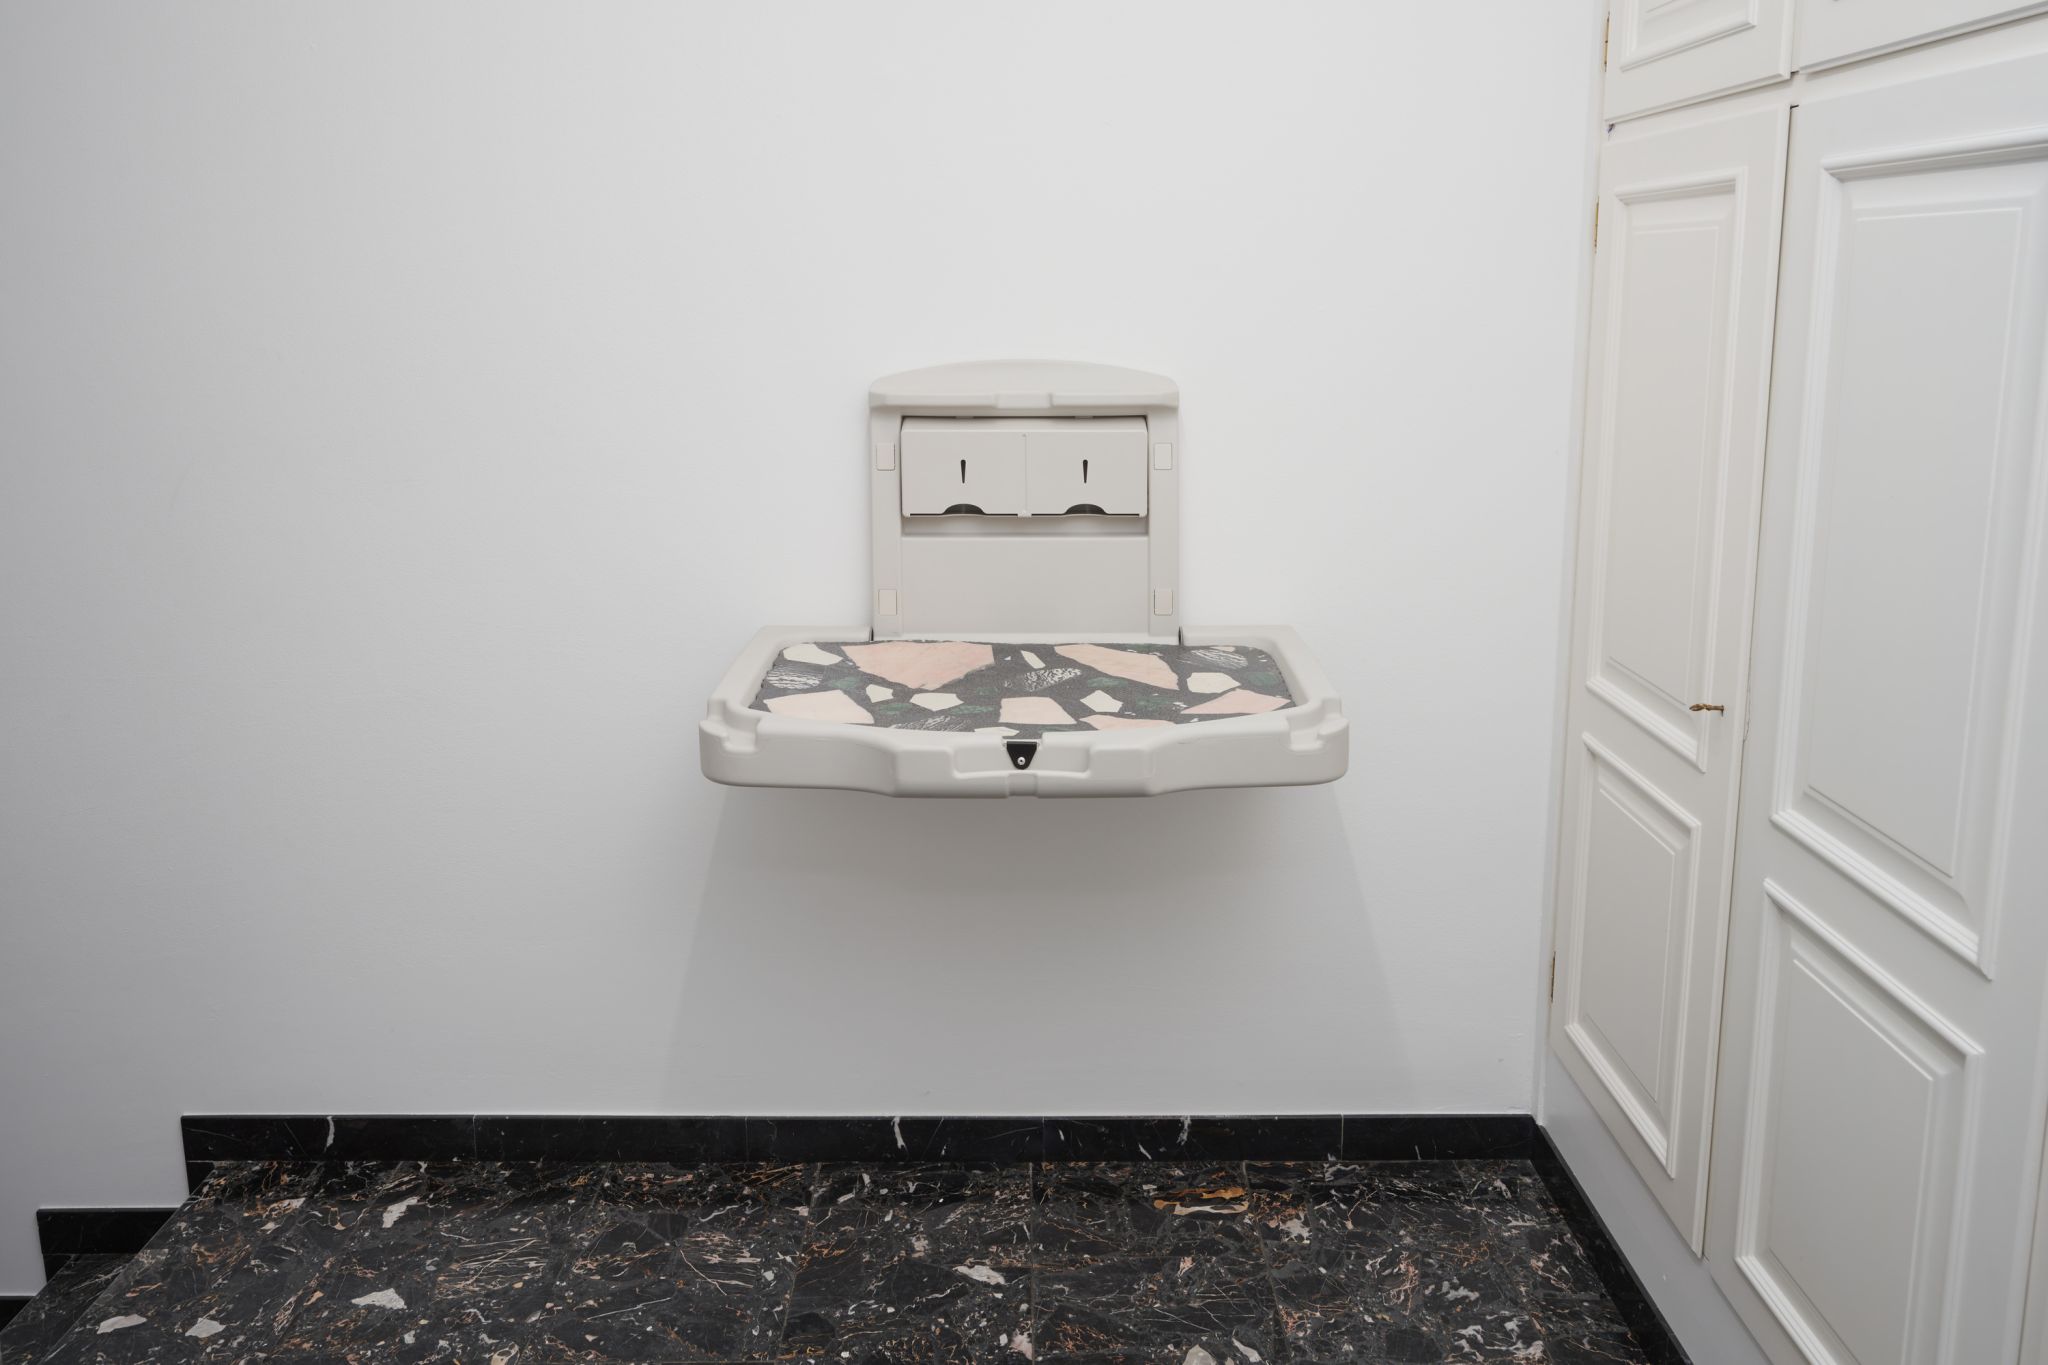 Nicole Wermers, Moodboard #3, 2016, Baby changing unit, cast terrazzo, 48.9 ⁠× ⁠88.3 ⁠× ⁠58.4 ⁠⁠cm, Courtesy the artist and Herald St, London